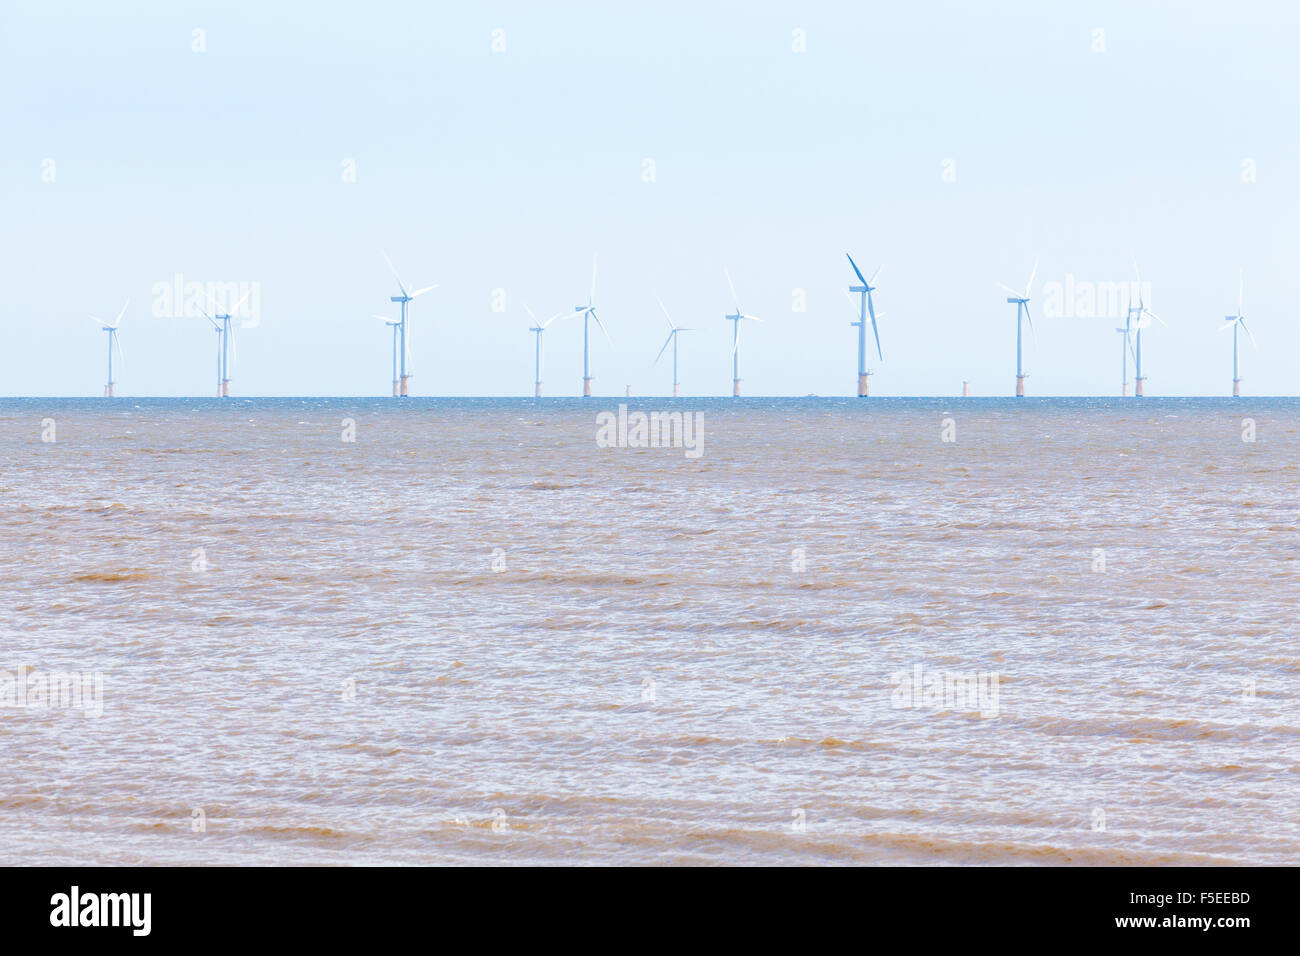 The Lynn & Inner Dowsing wind farm. Offshore wind turbines in the North Sea, seen from Skegness, Lincolnshire, England, UK Stock Photo